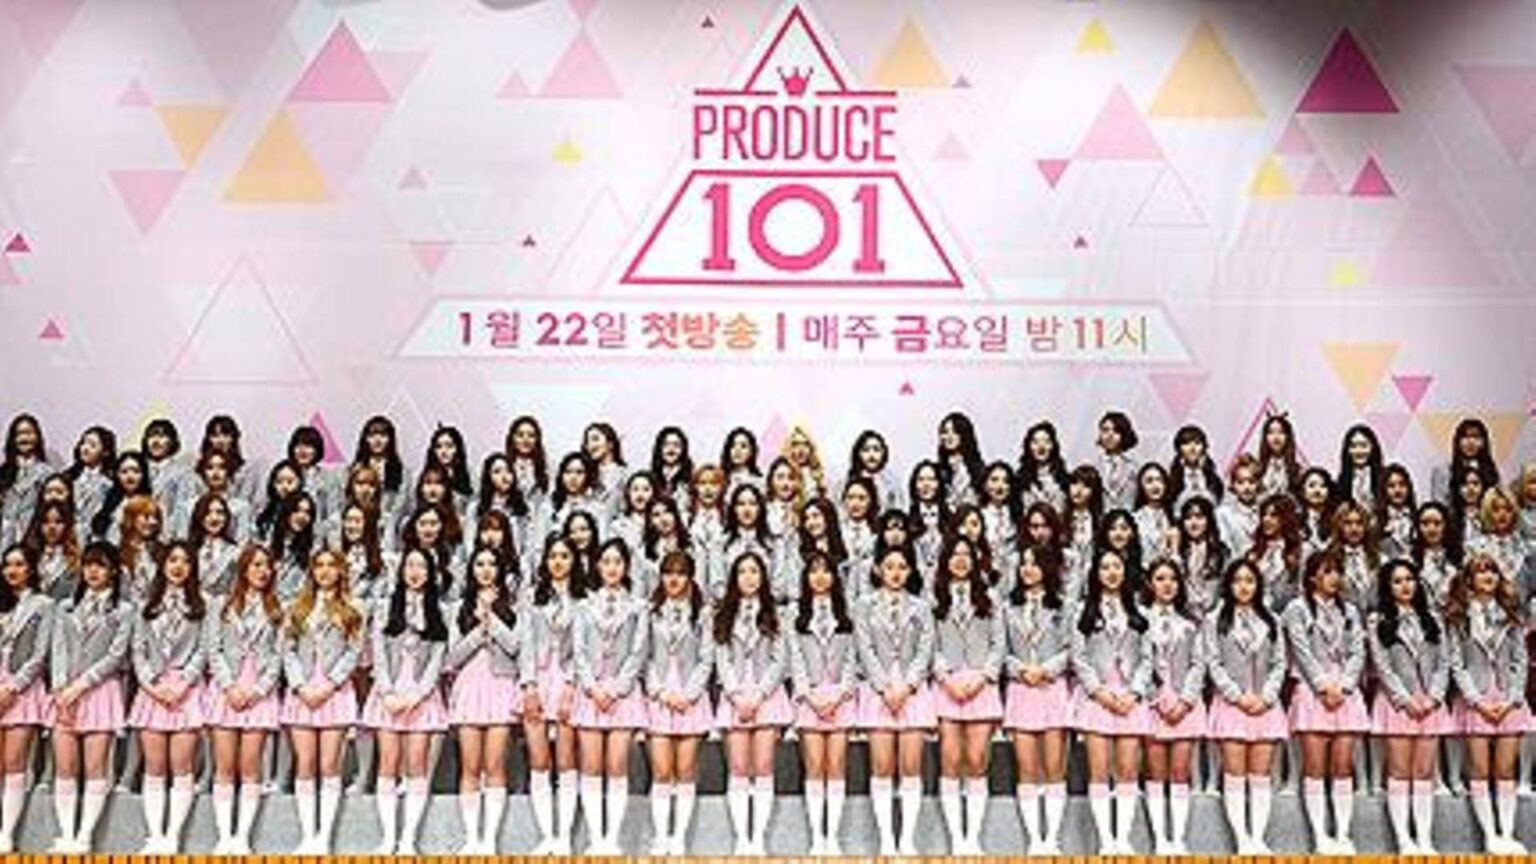 Anyone who is slightly invested in K-pop knows it takes a lot to become a star. Now, you can learn exactly how much from a former trainee herself.